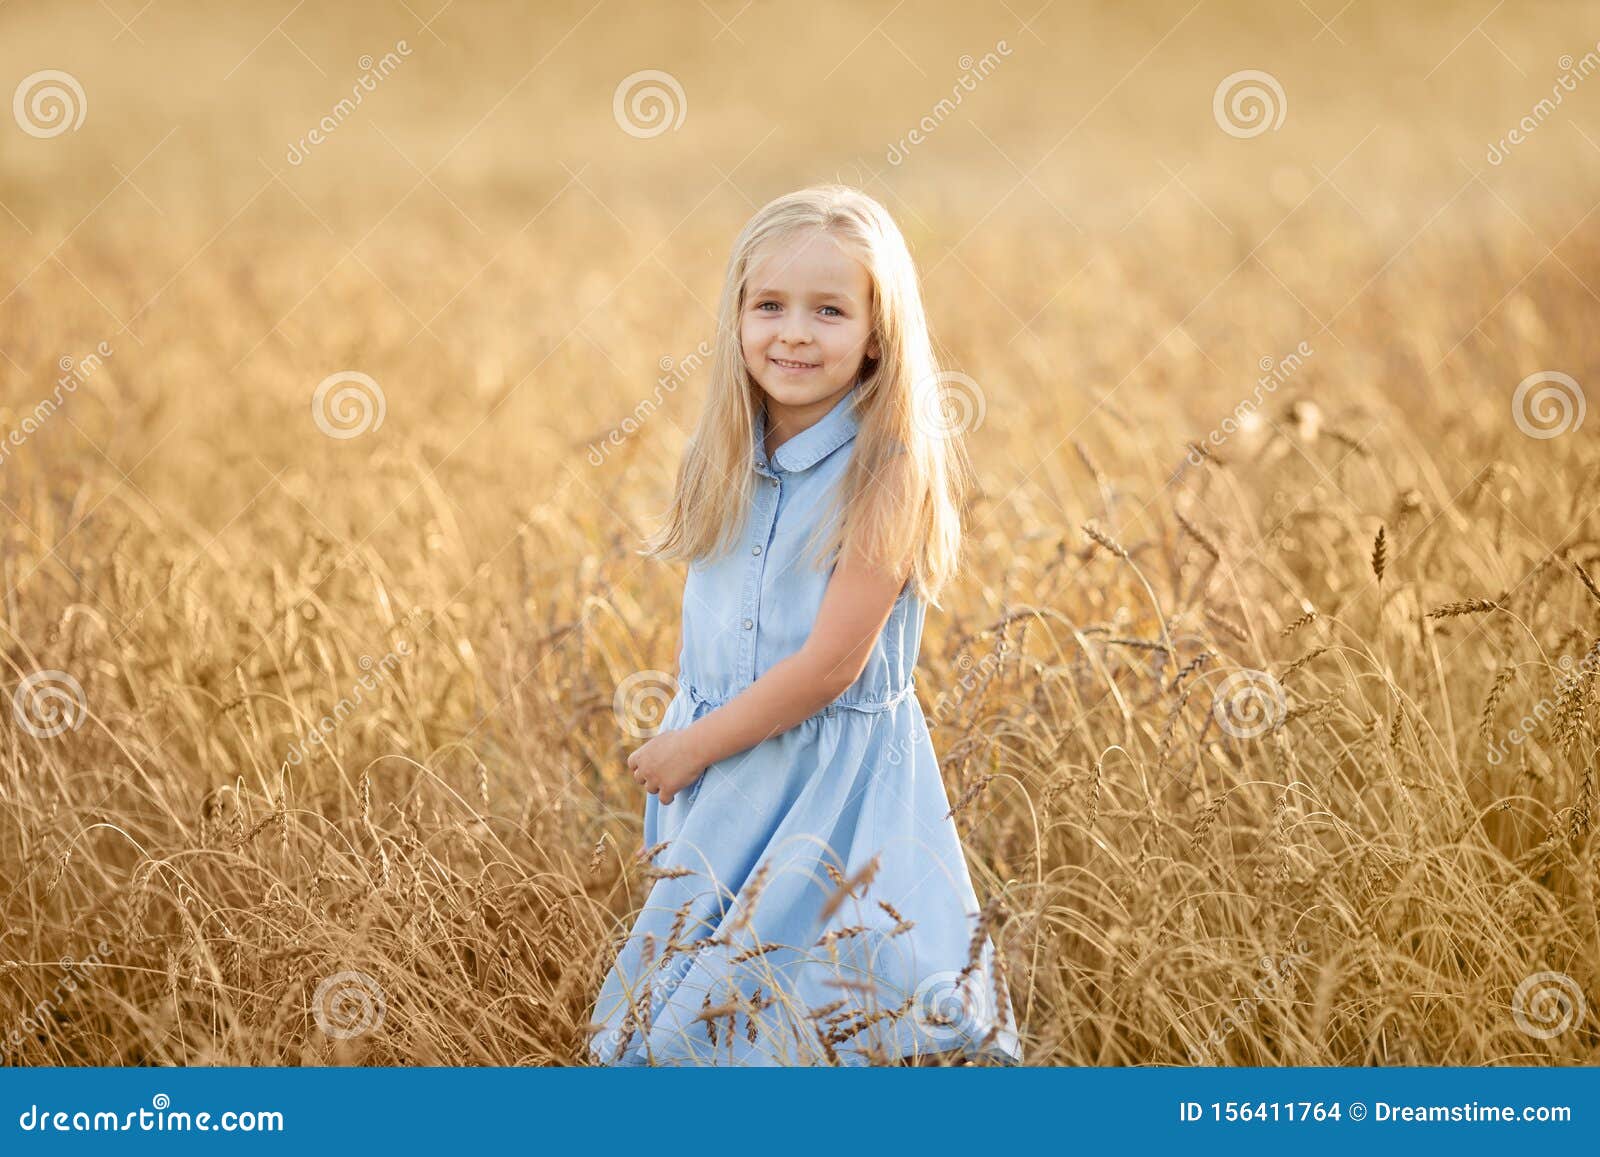 Young Woman In The Wheat Field Stock Photo - Download 